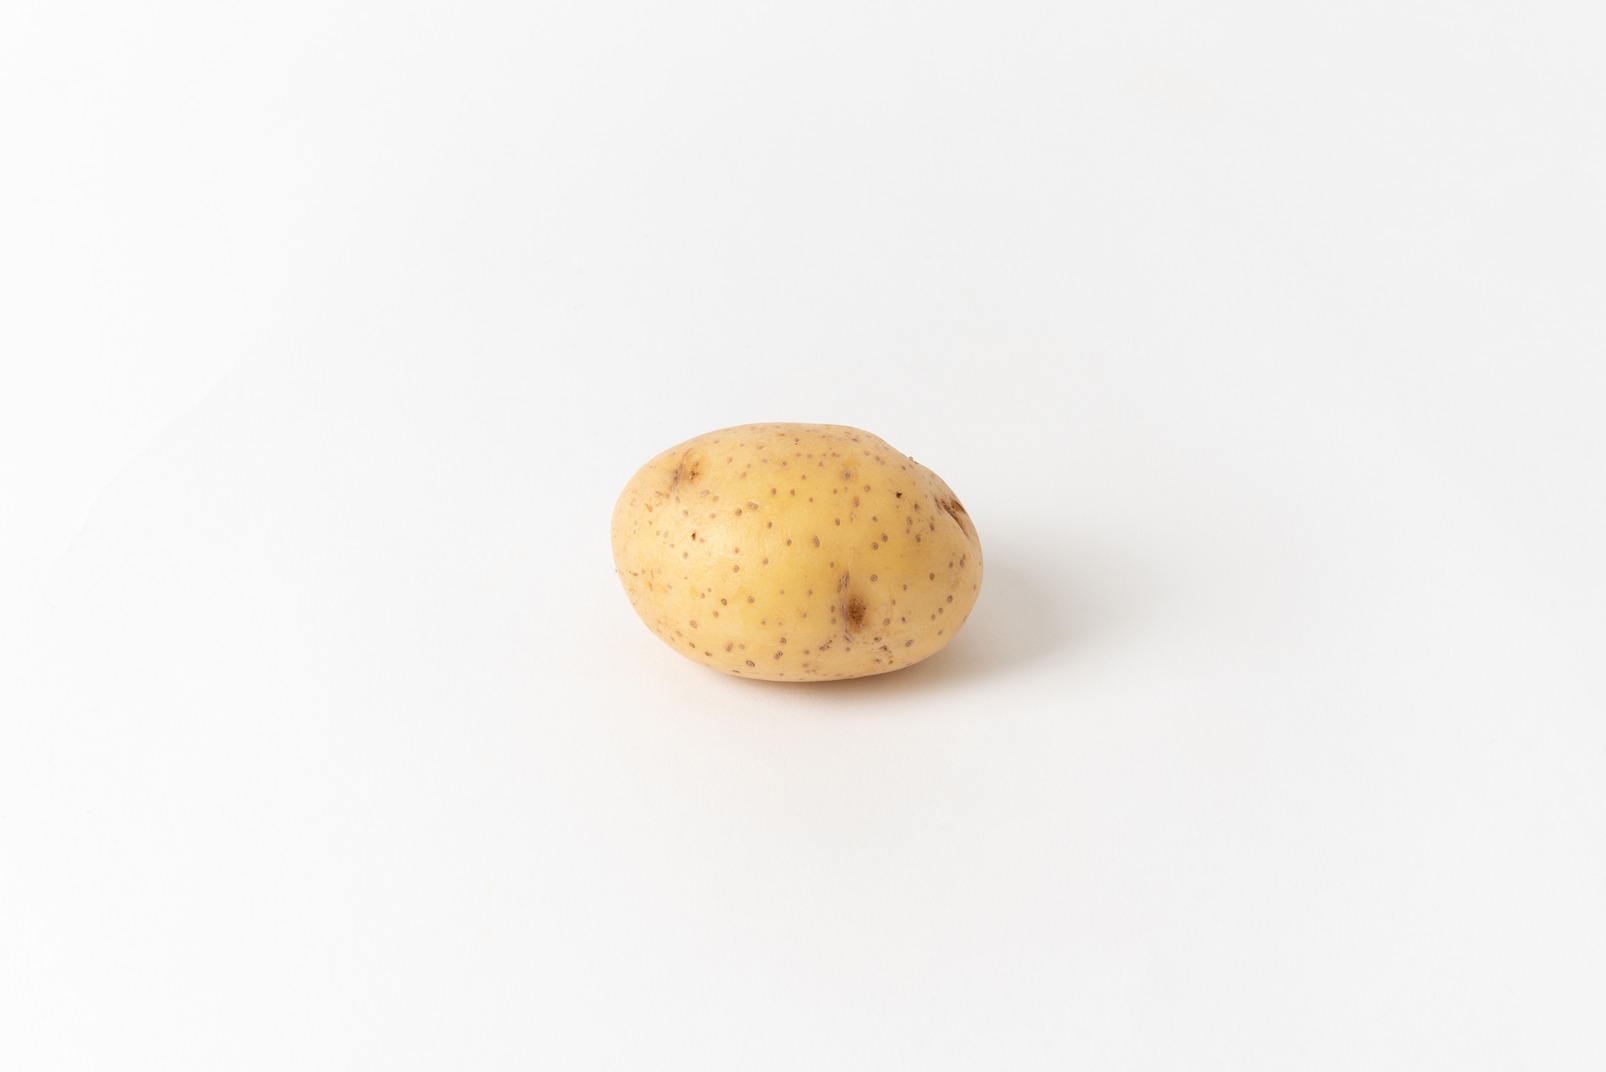 Potatoes are great for your skin health